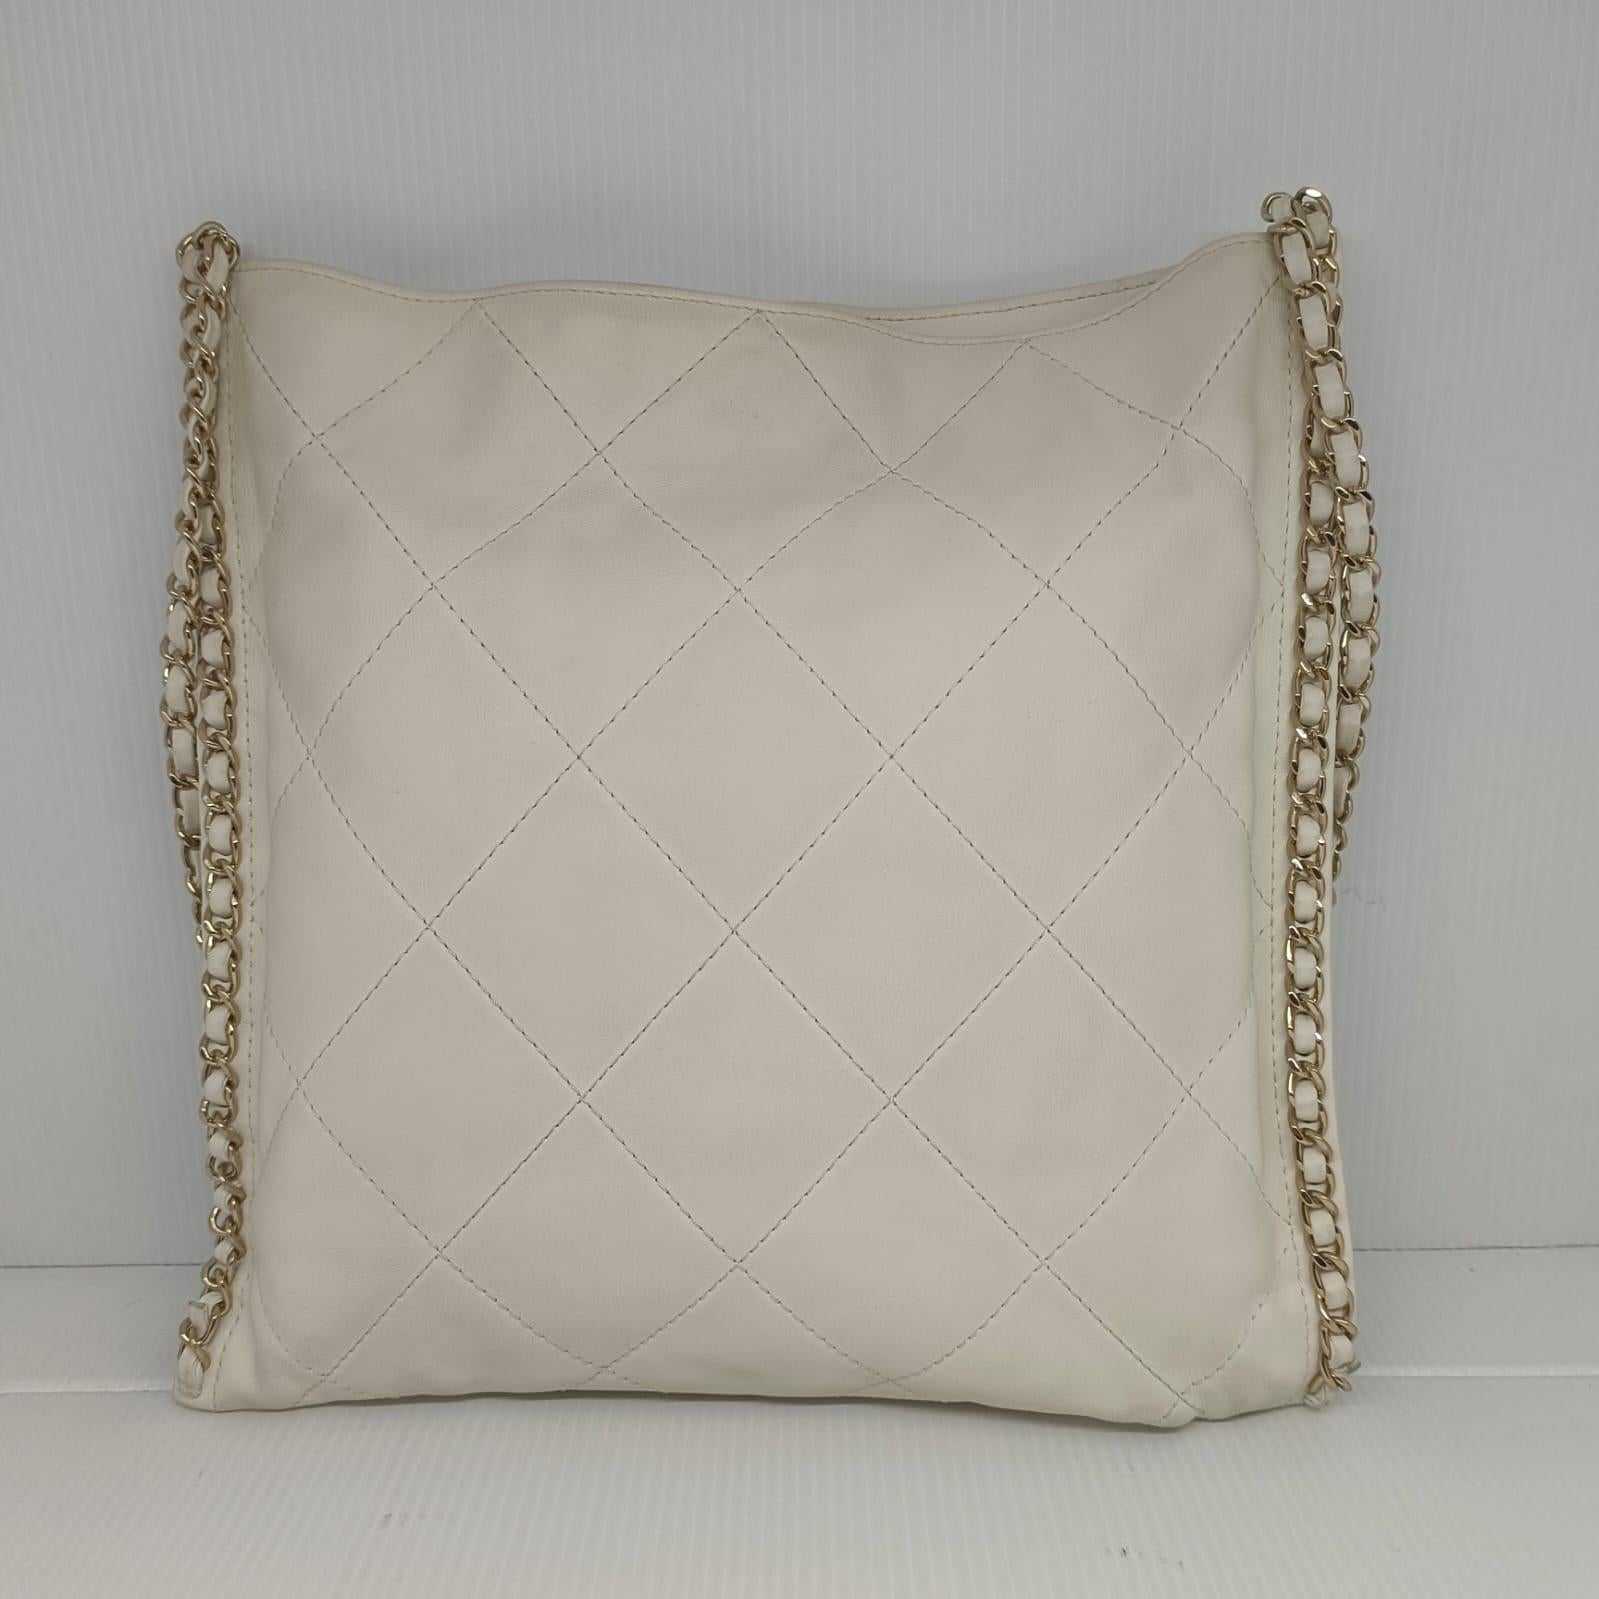 2022 Chanel White Calfskin Quilted Chain Trimmed Flat Tote Bag 5